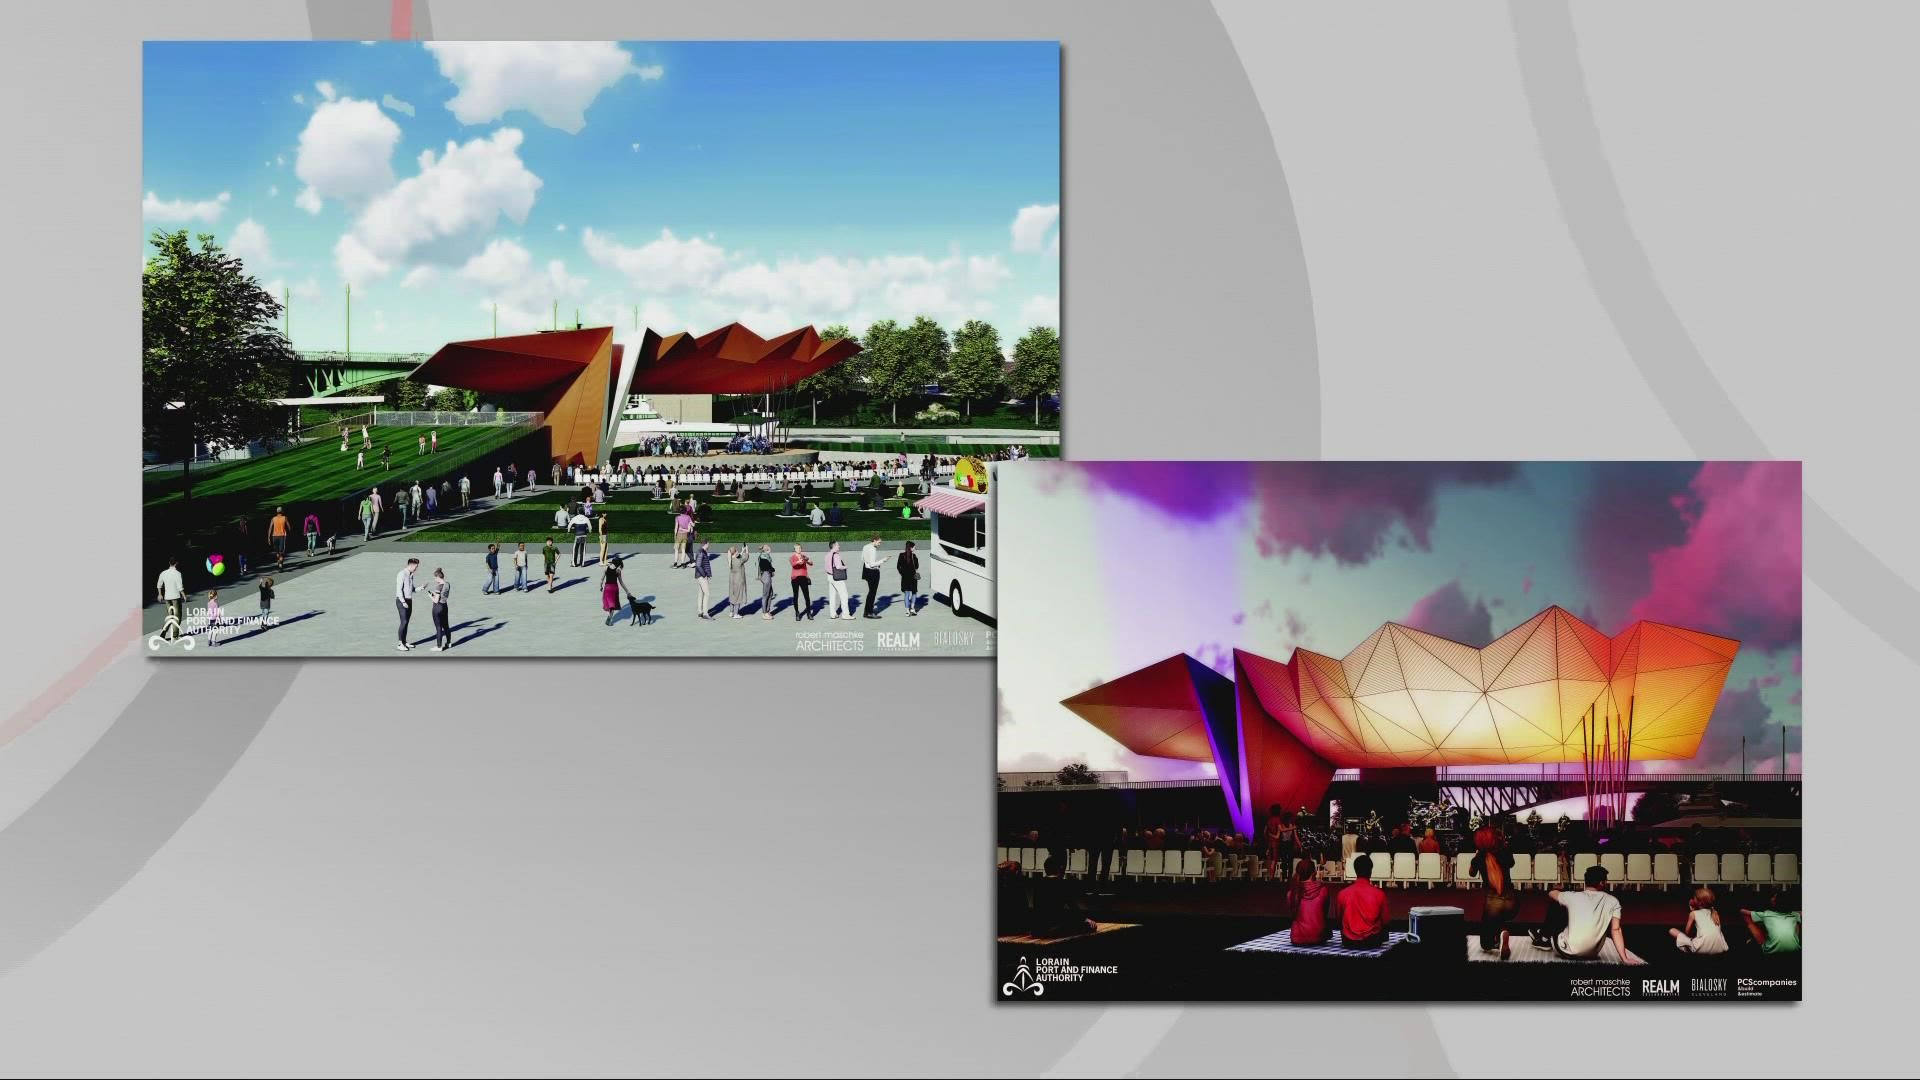 Good news may be coming to Lorain residents, where the Port Authority is partnering organizations to design a new amphitheater connecting the riverfront to downtown.